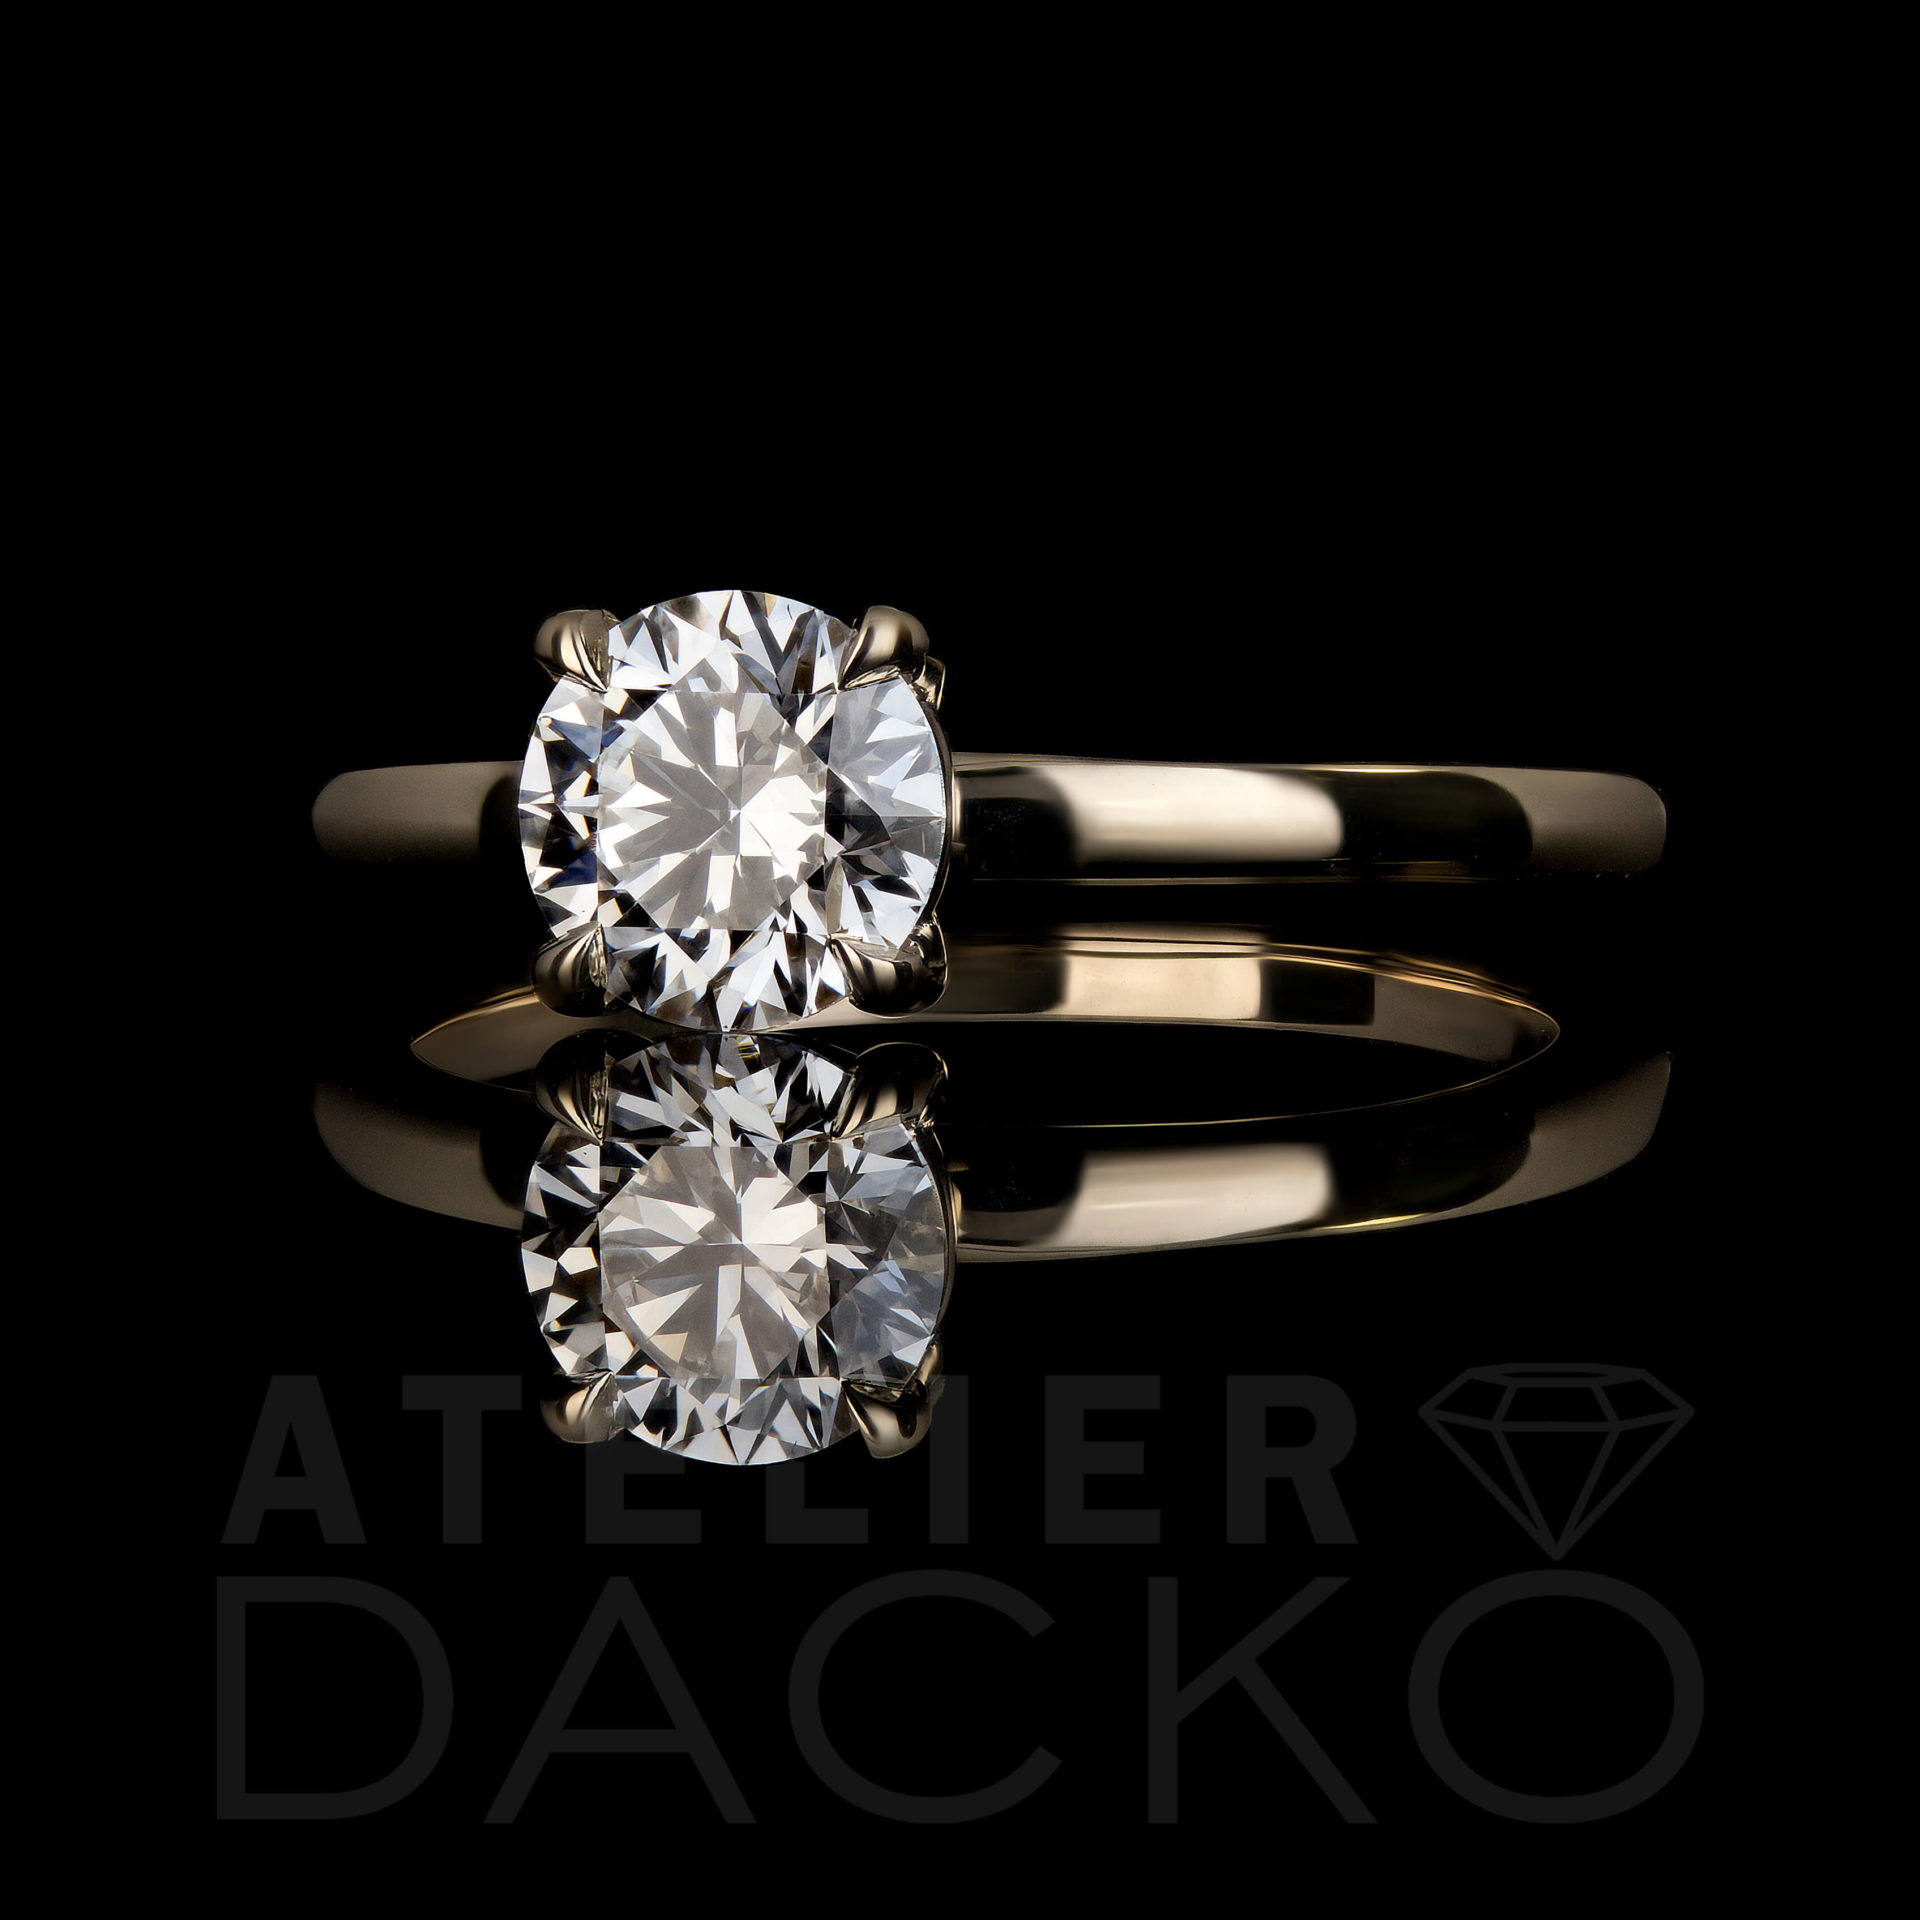 AD034 - 0.60 CT Round Diamond Solitaire Engagement Ring in Yellow Gold - 2